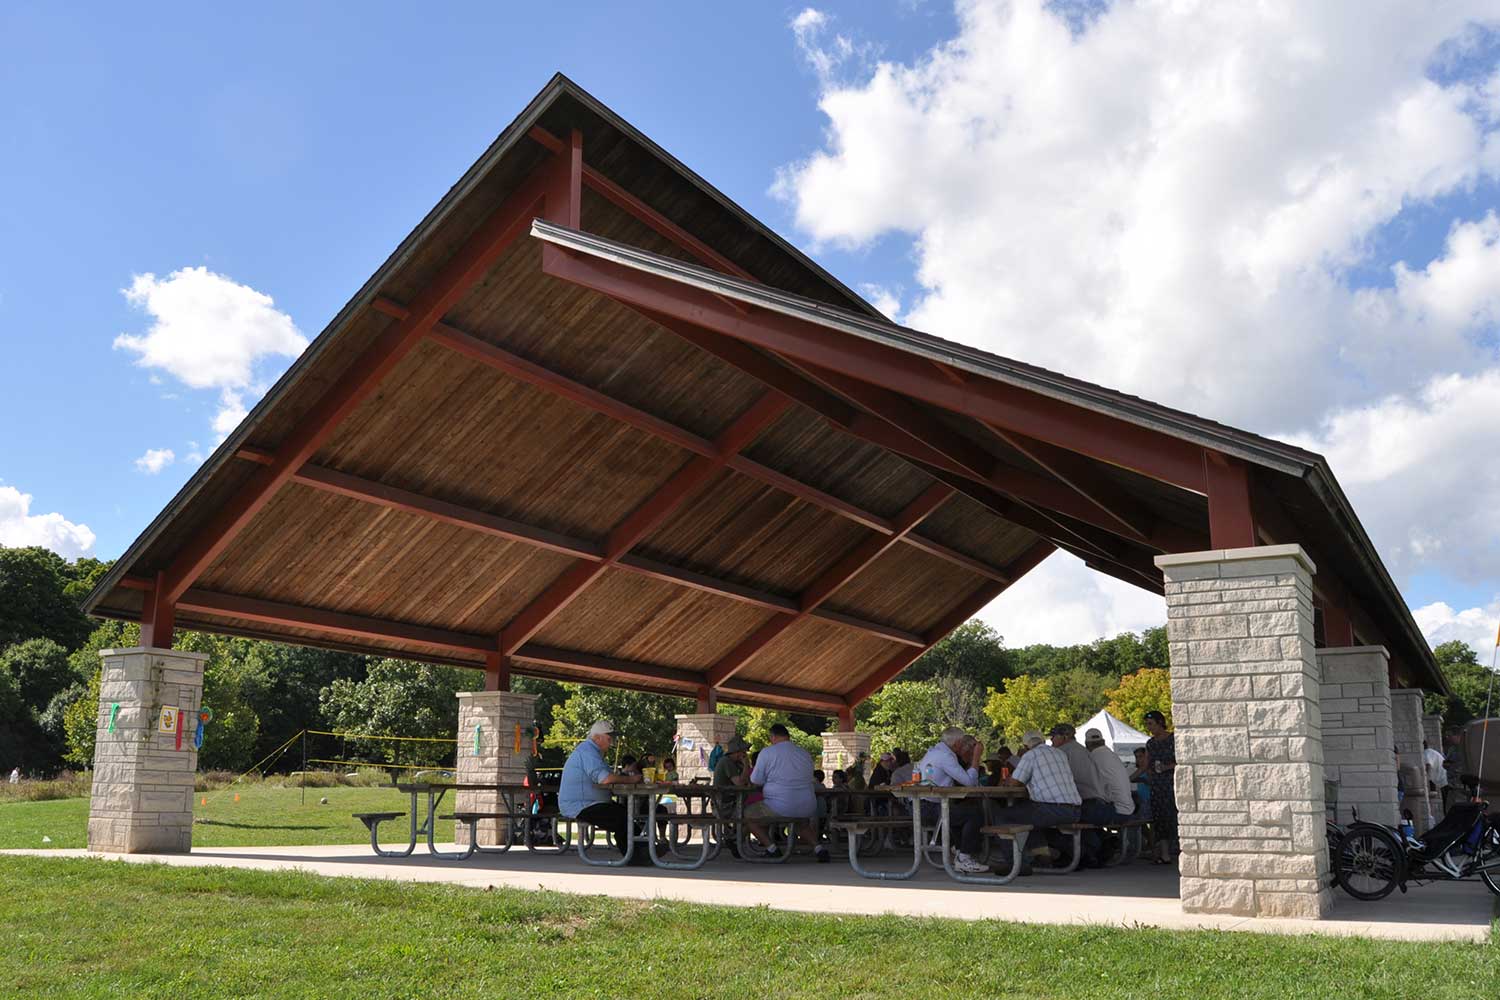 The picnic shelter at LaPorte Road Access.